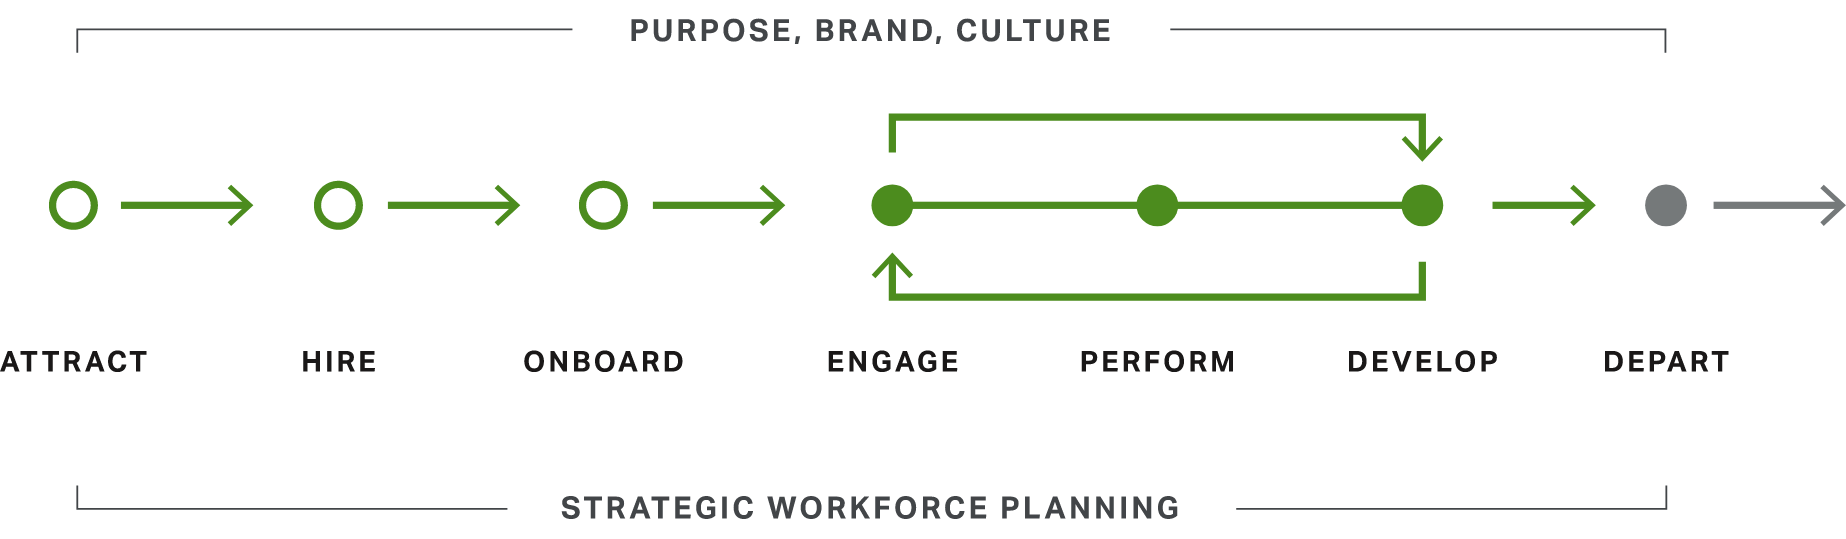 A flow chart displaying the 7 stages of the employee experience, which are: attract, hire, onboard, engage, perform, develop, and depart.